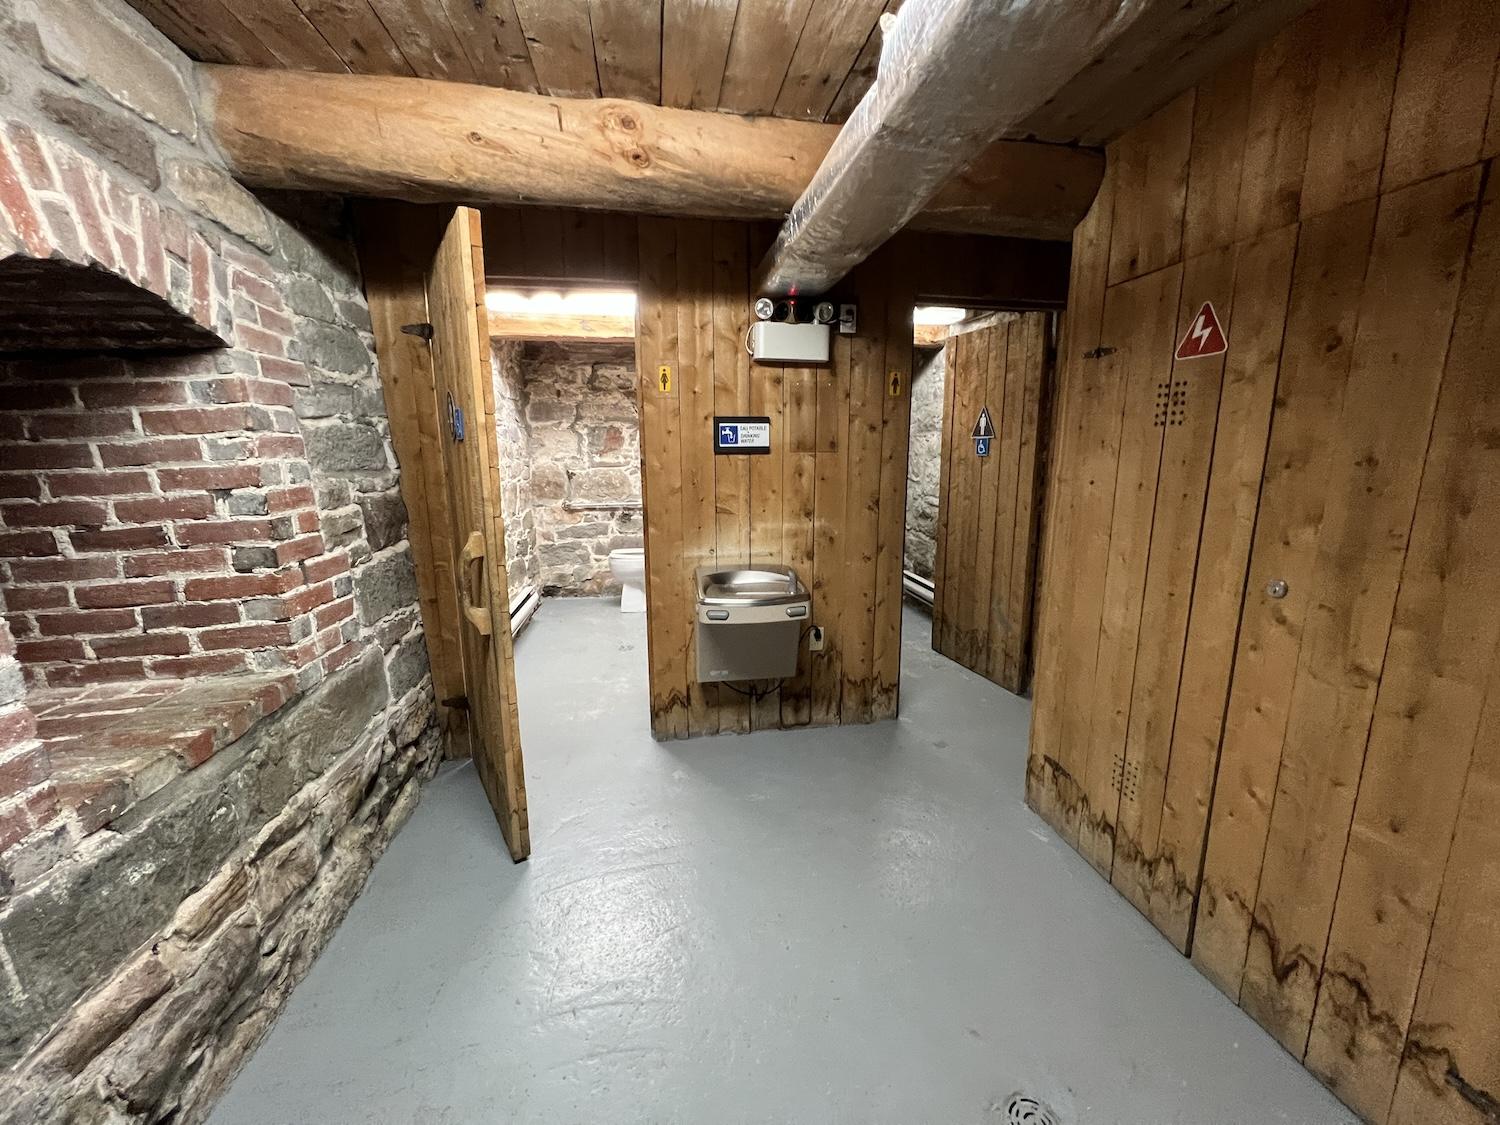 In Forillon National Park, this bathroom is hidden underneath Hyman & Sons General Store.